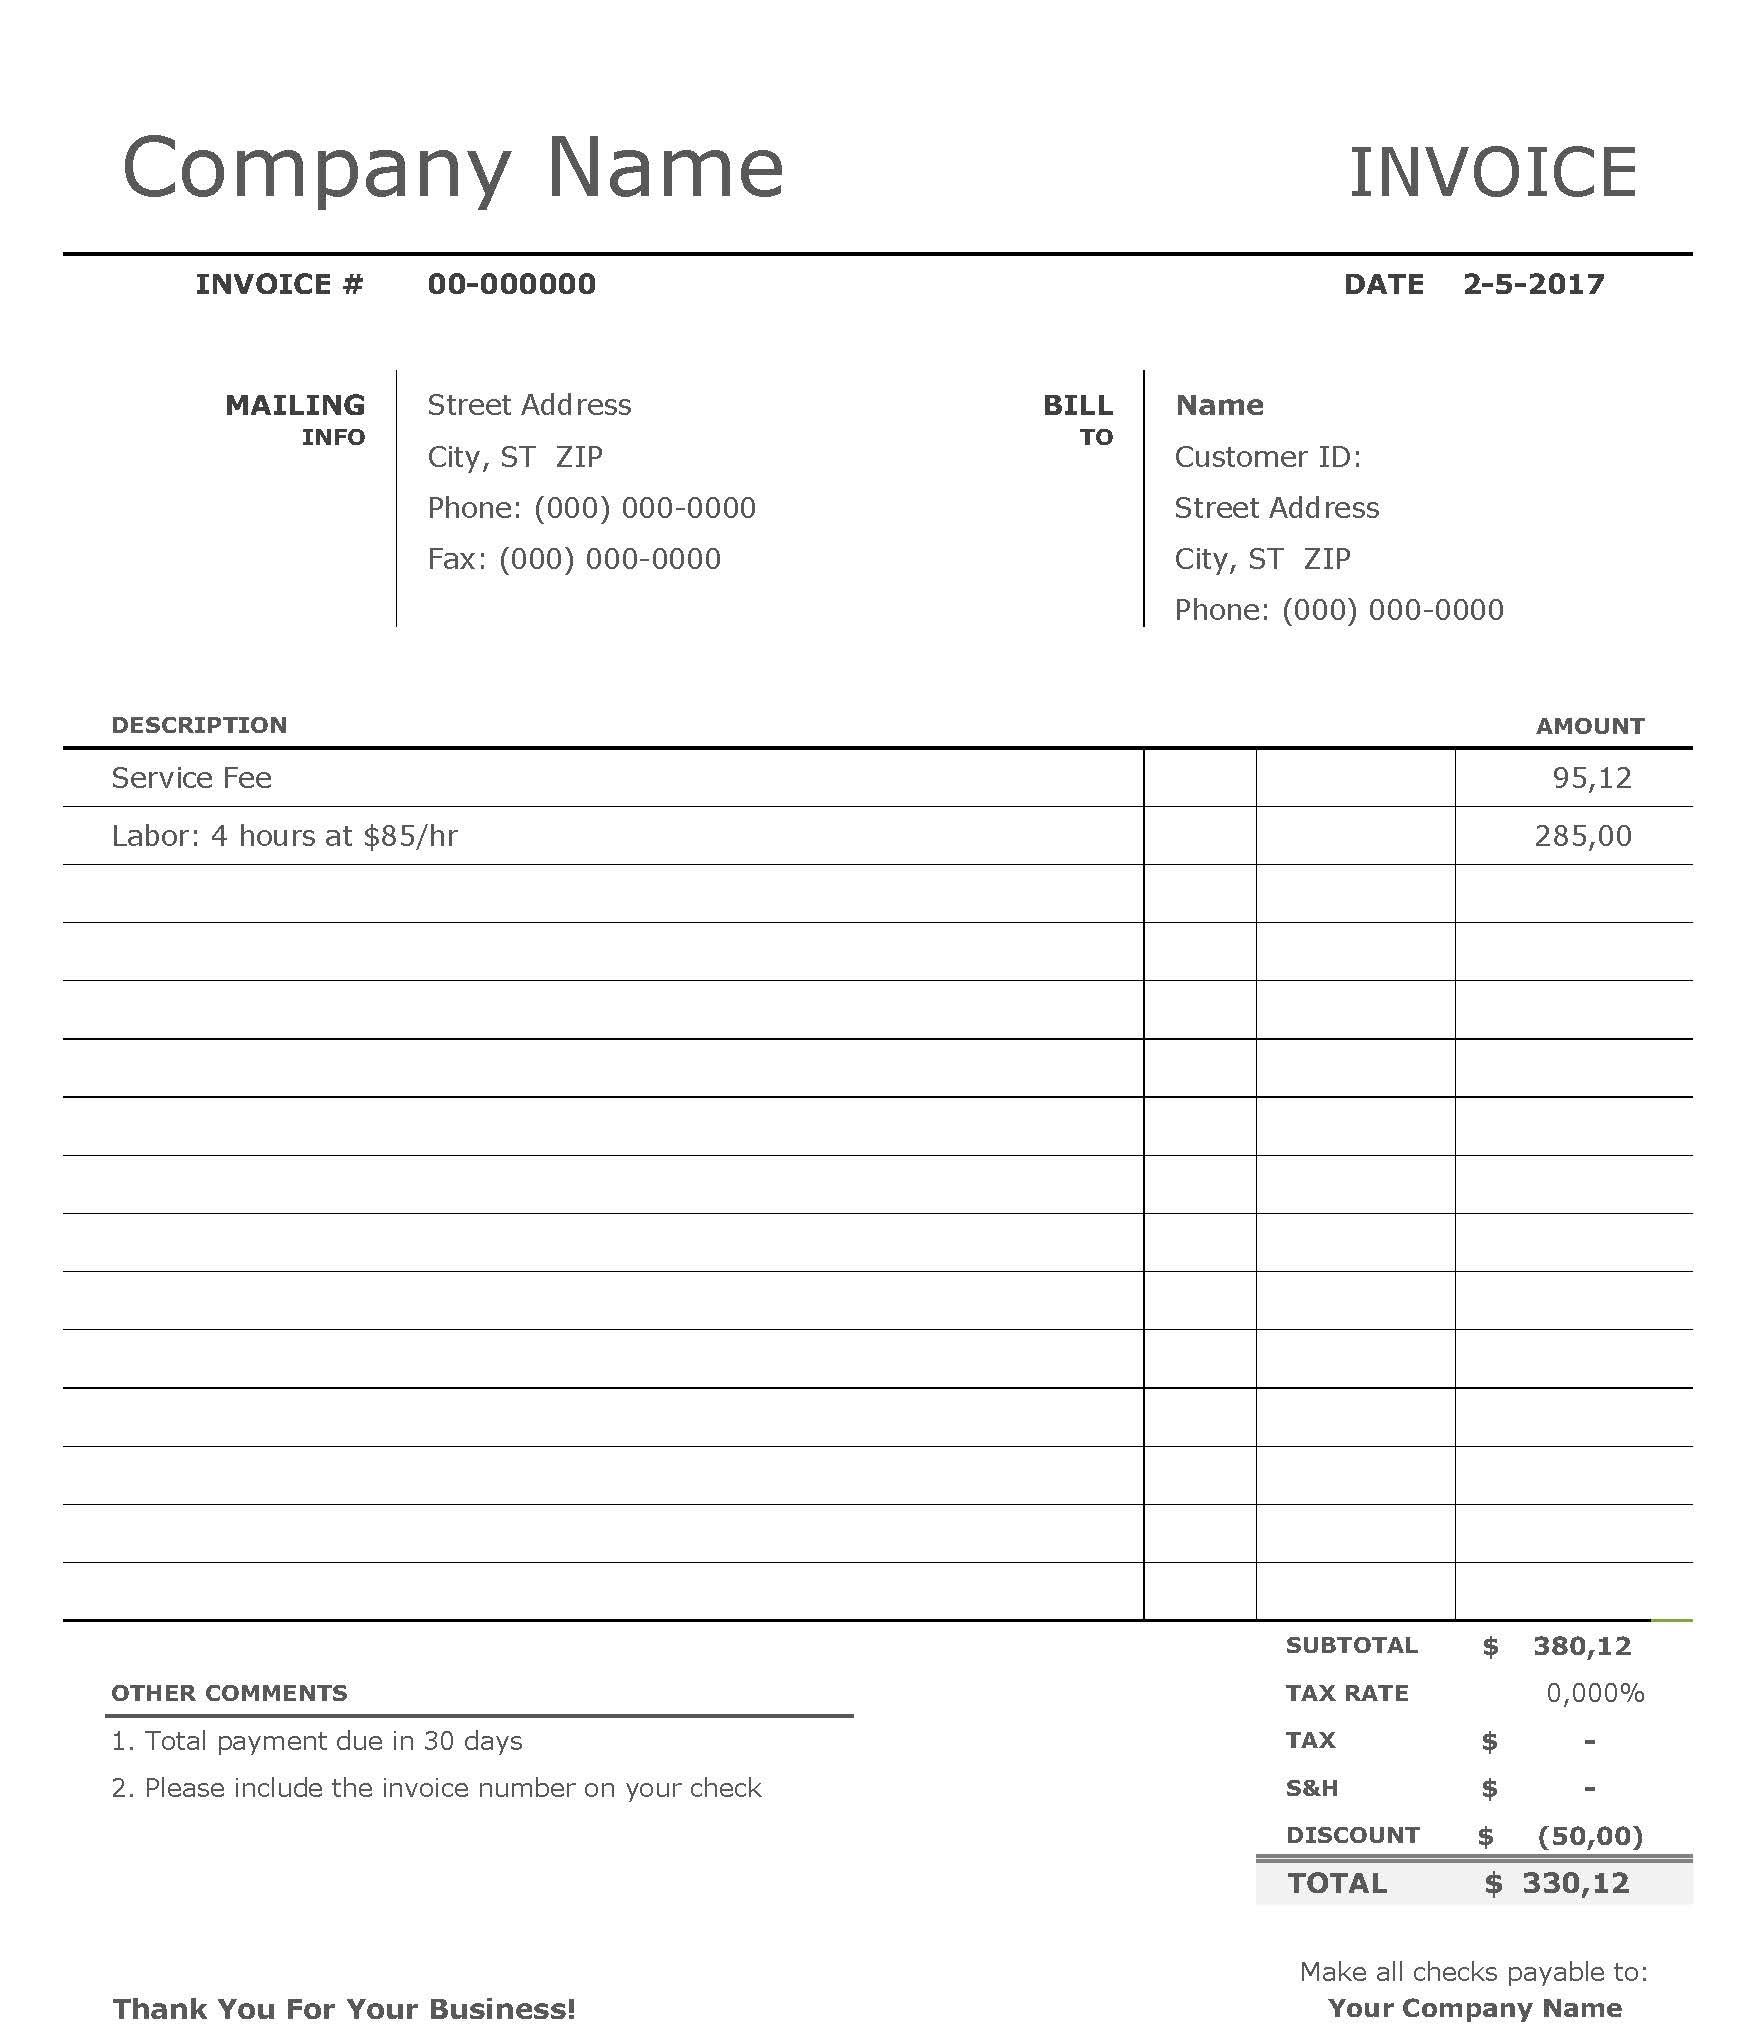 i-need-an-invoice-template